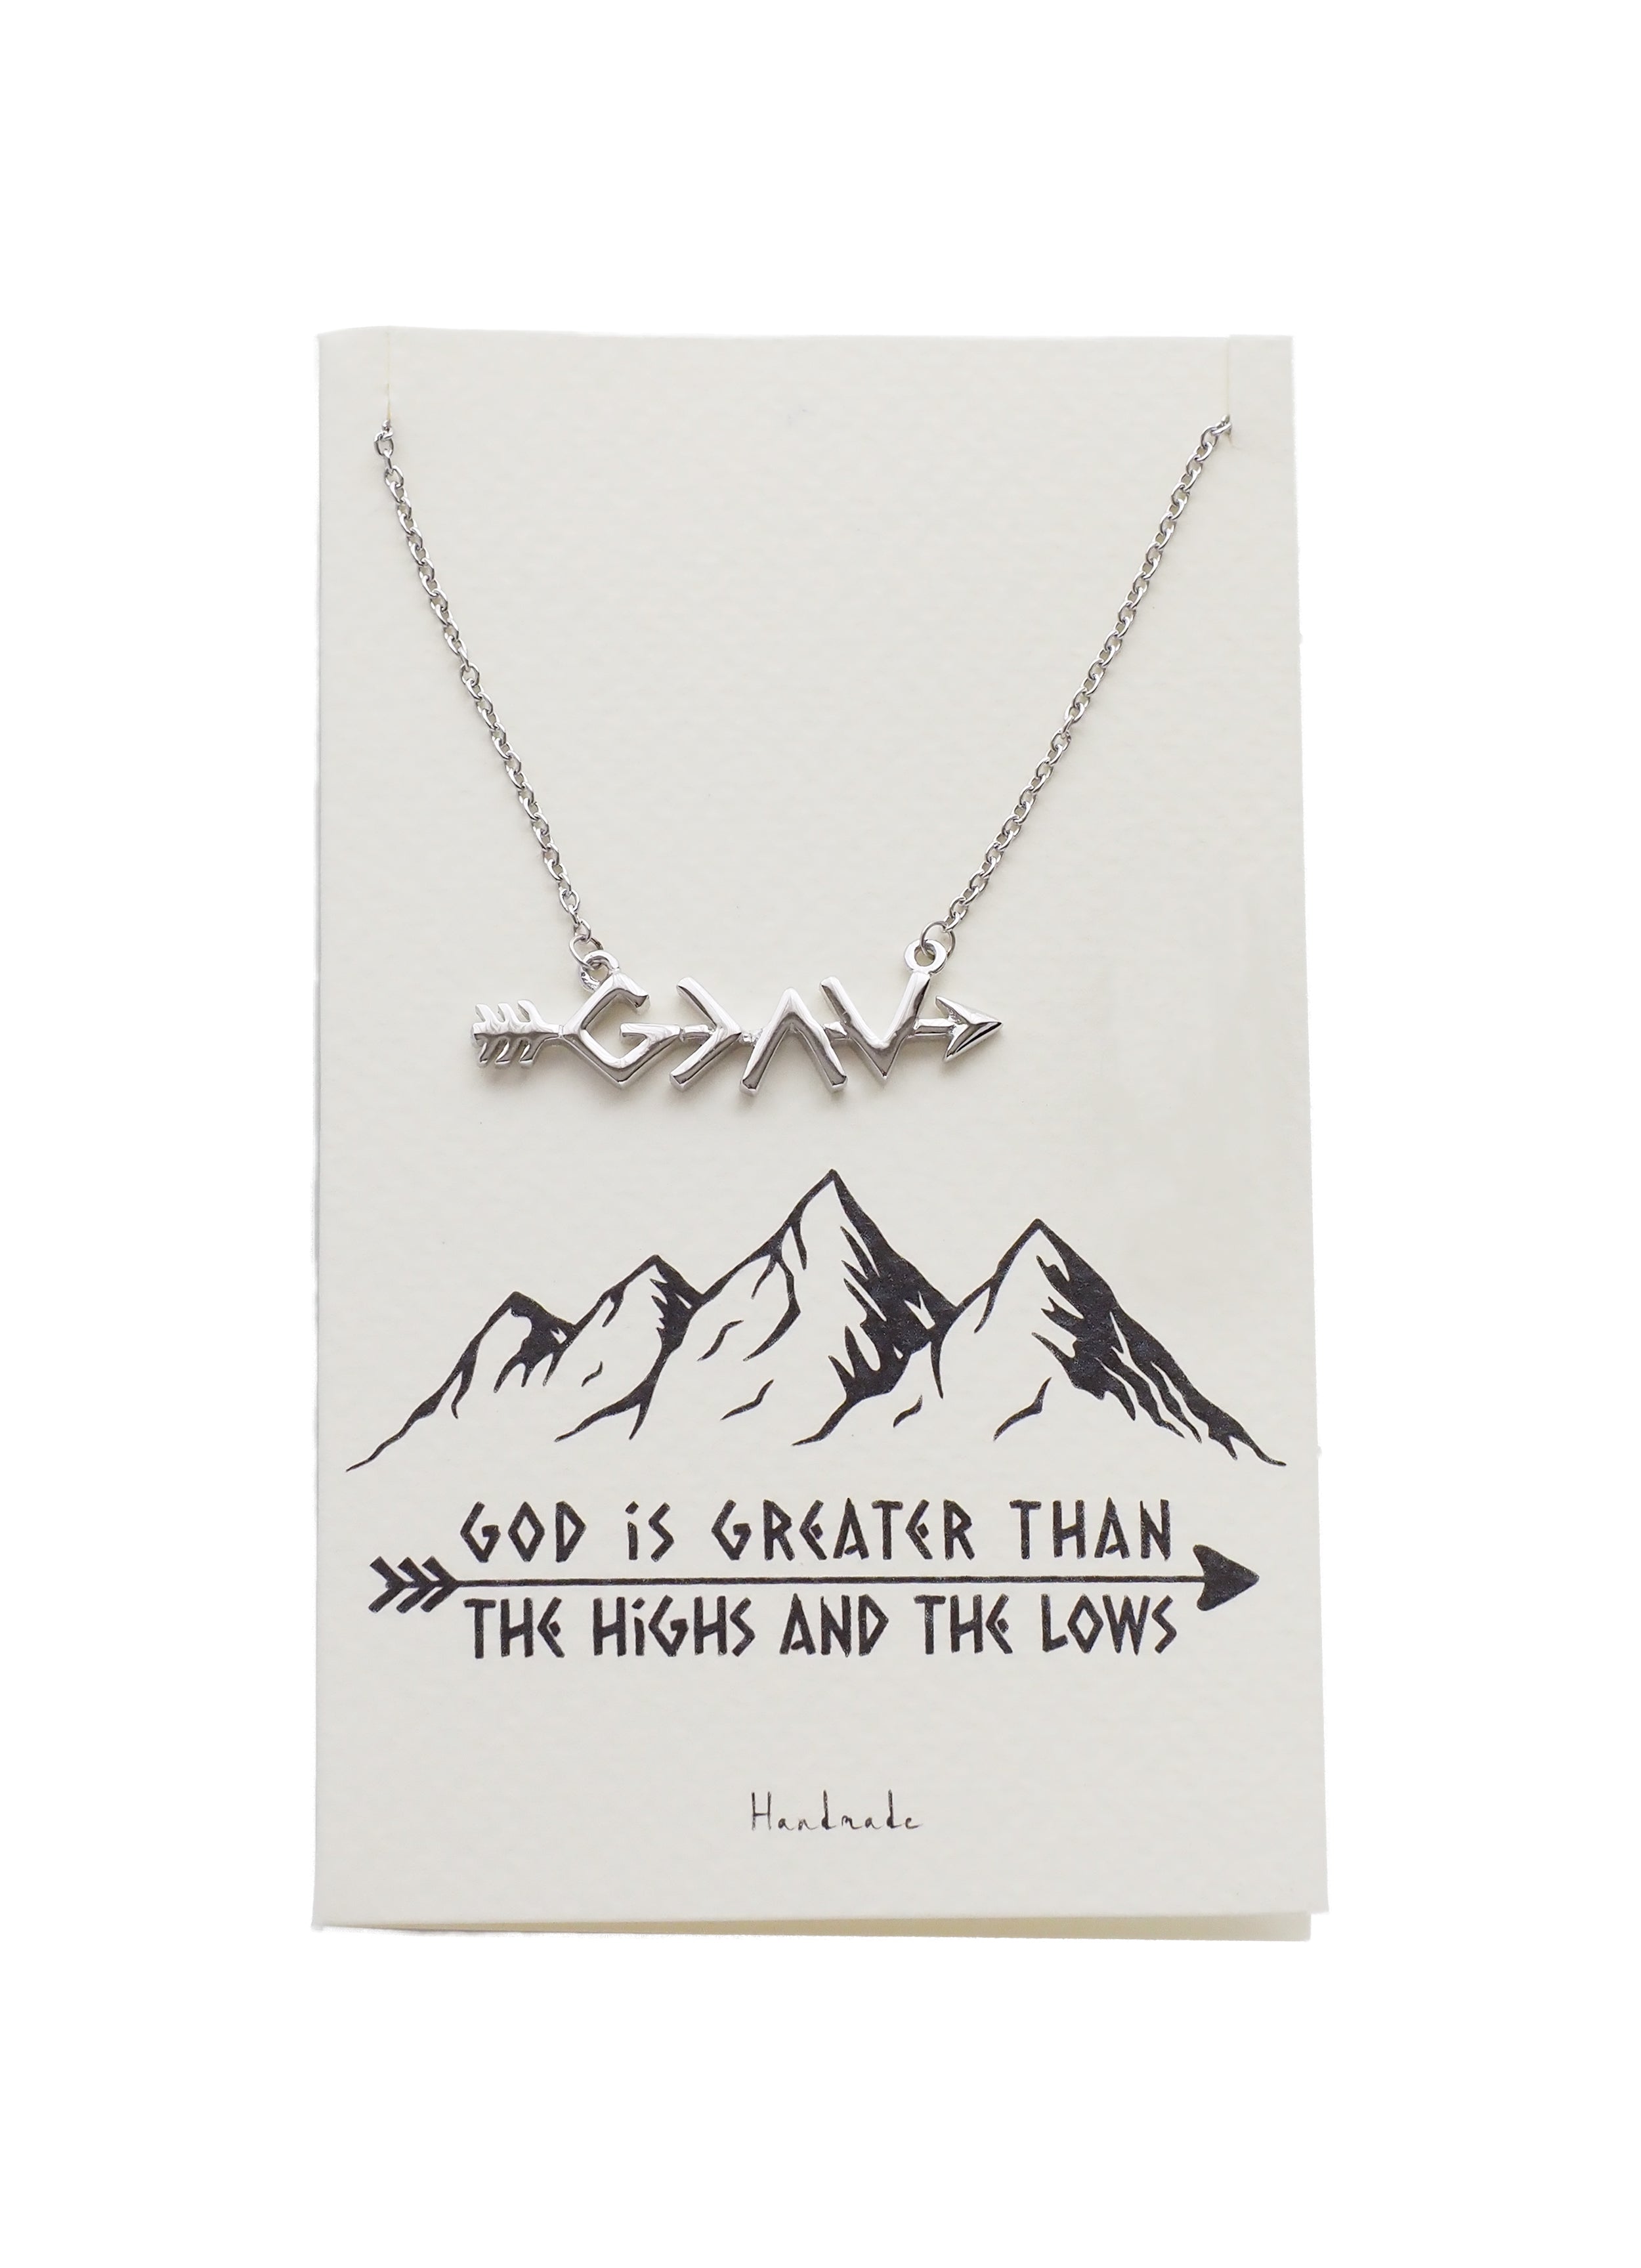 Joyfulle Chloe Arrow and God is Greater High Low Symbols Pendant Bar Necklace, Handmade Gifts for Women with Inspirational Greeting Card, Silver Tone